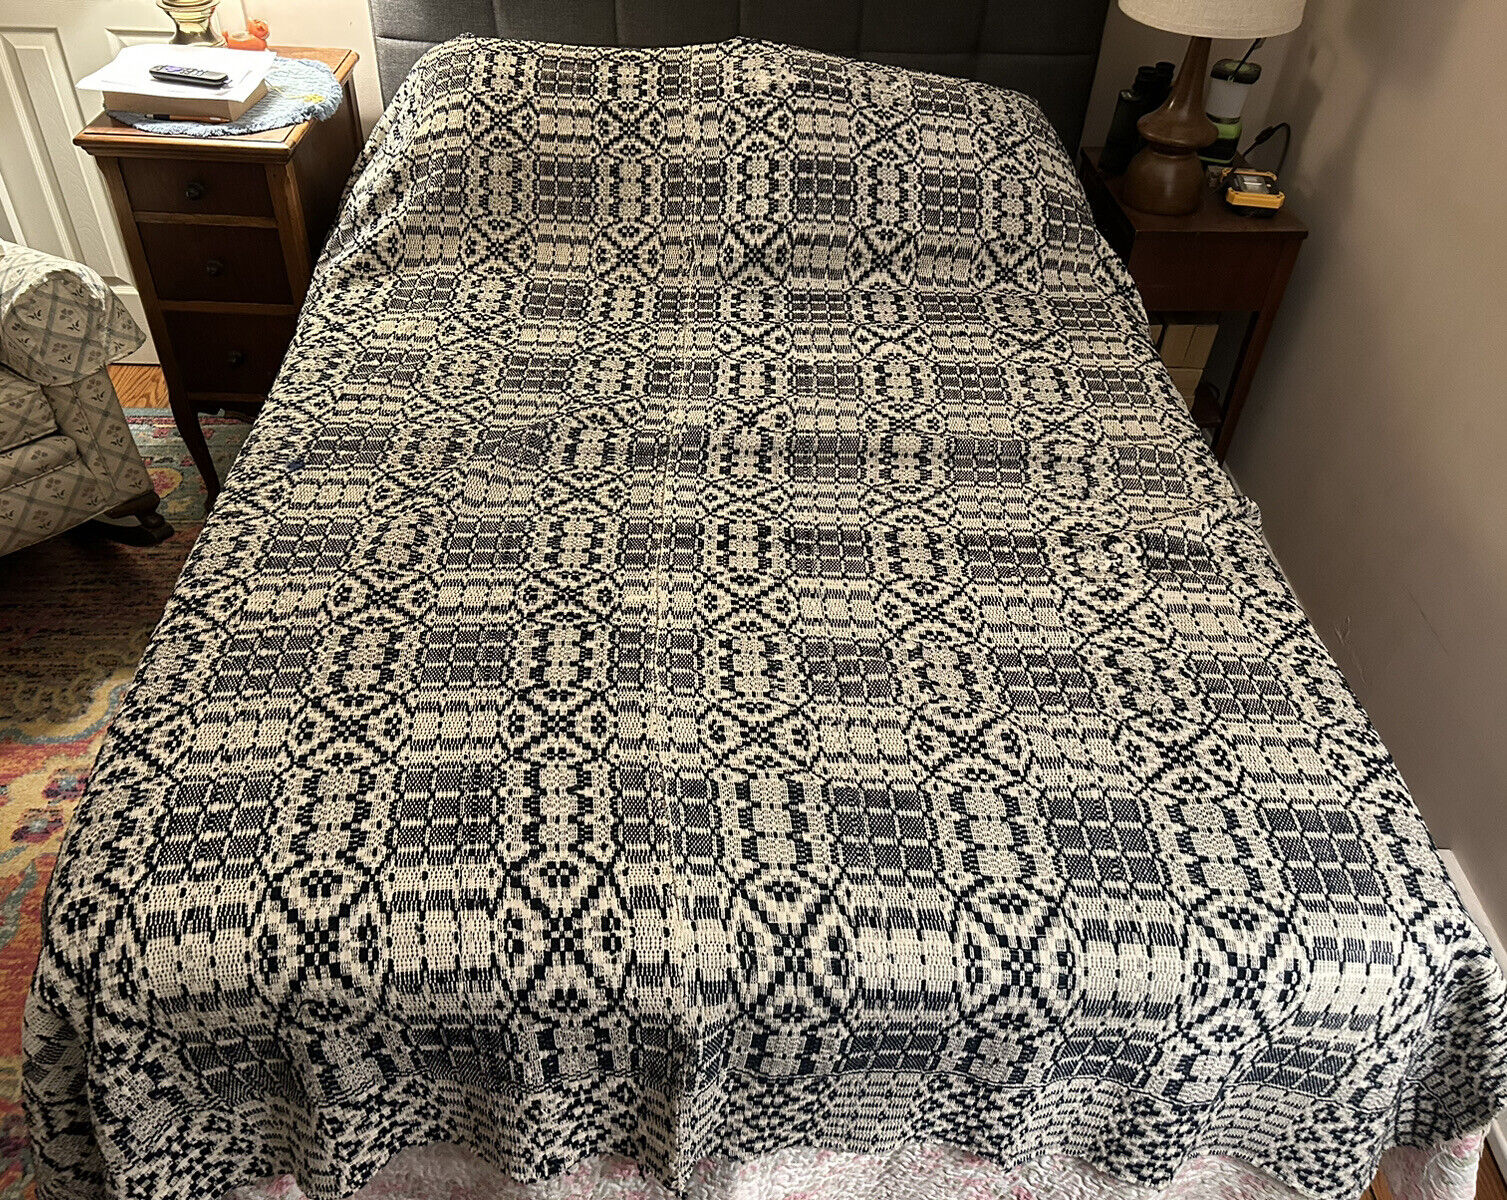 Antique Mid-1800s Jacquard Coverlet or Blanket Hand Loomed in Indigo Blue Wool